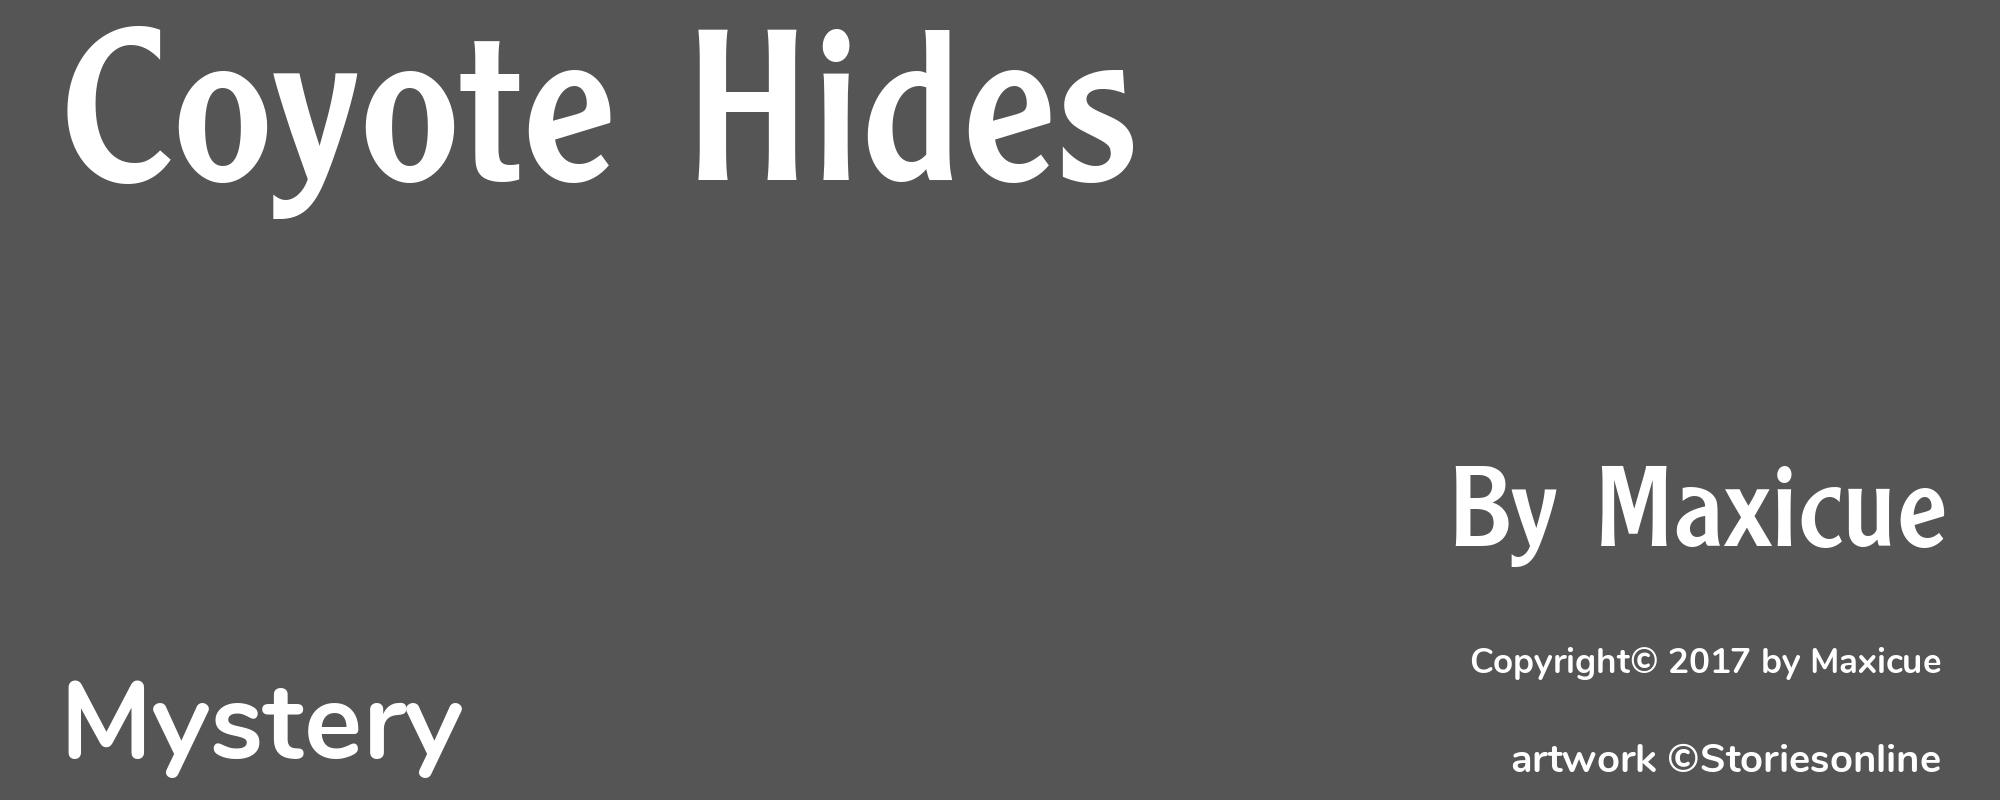 Coyote Hides - Cover